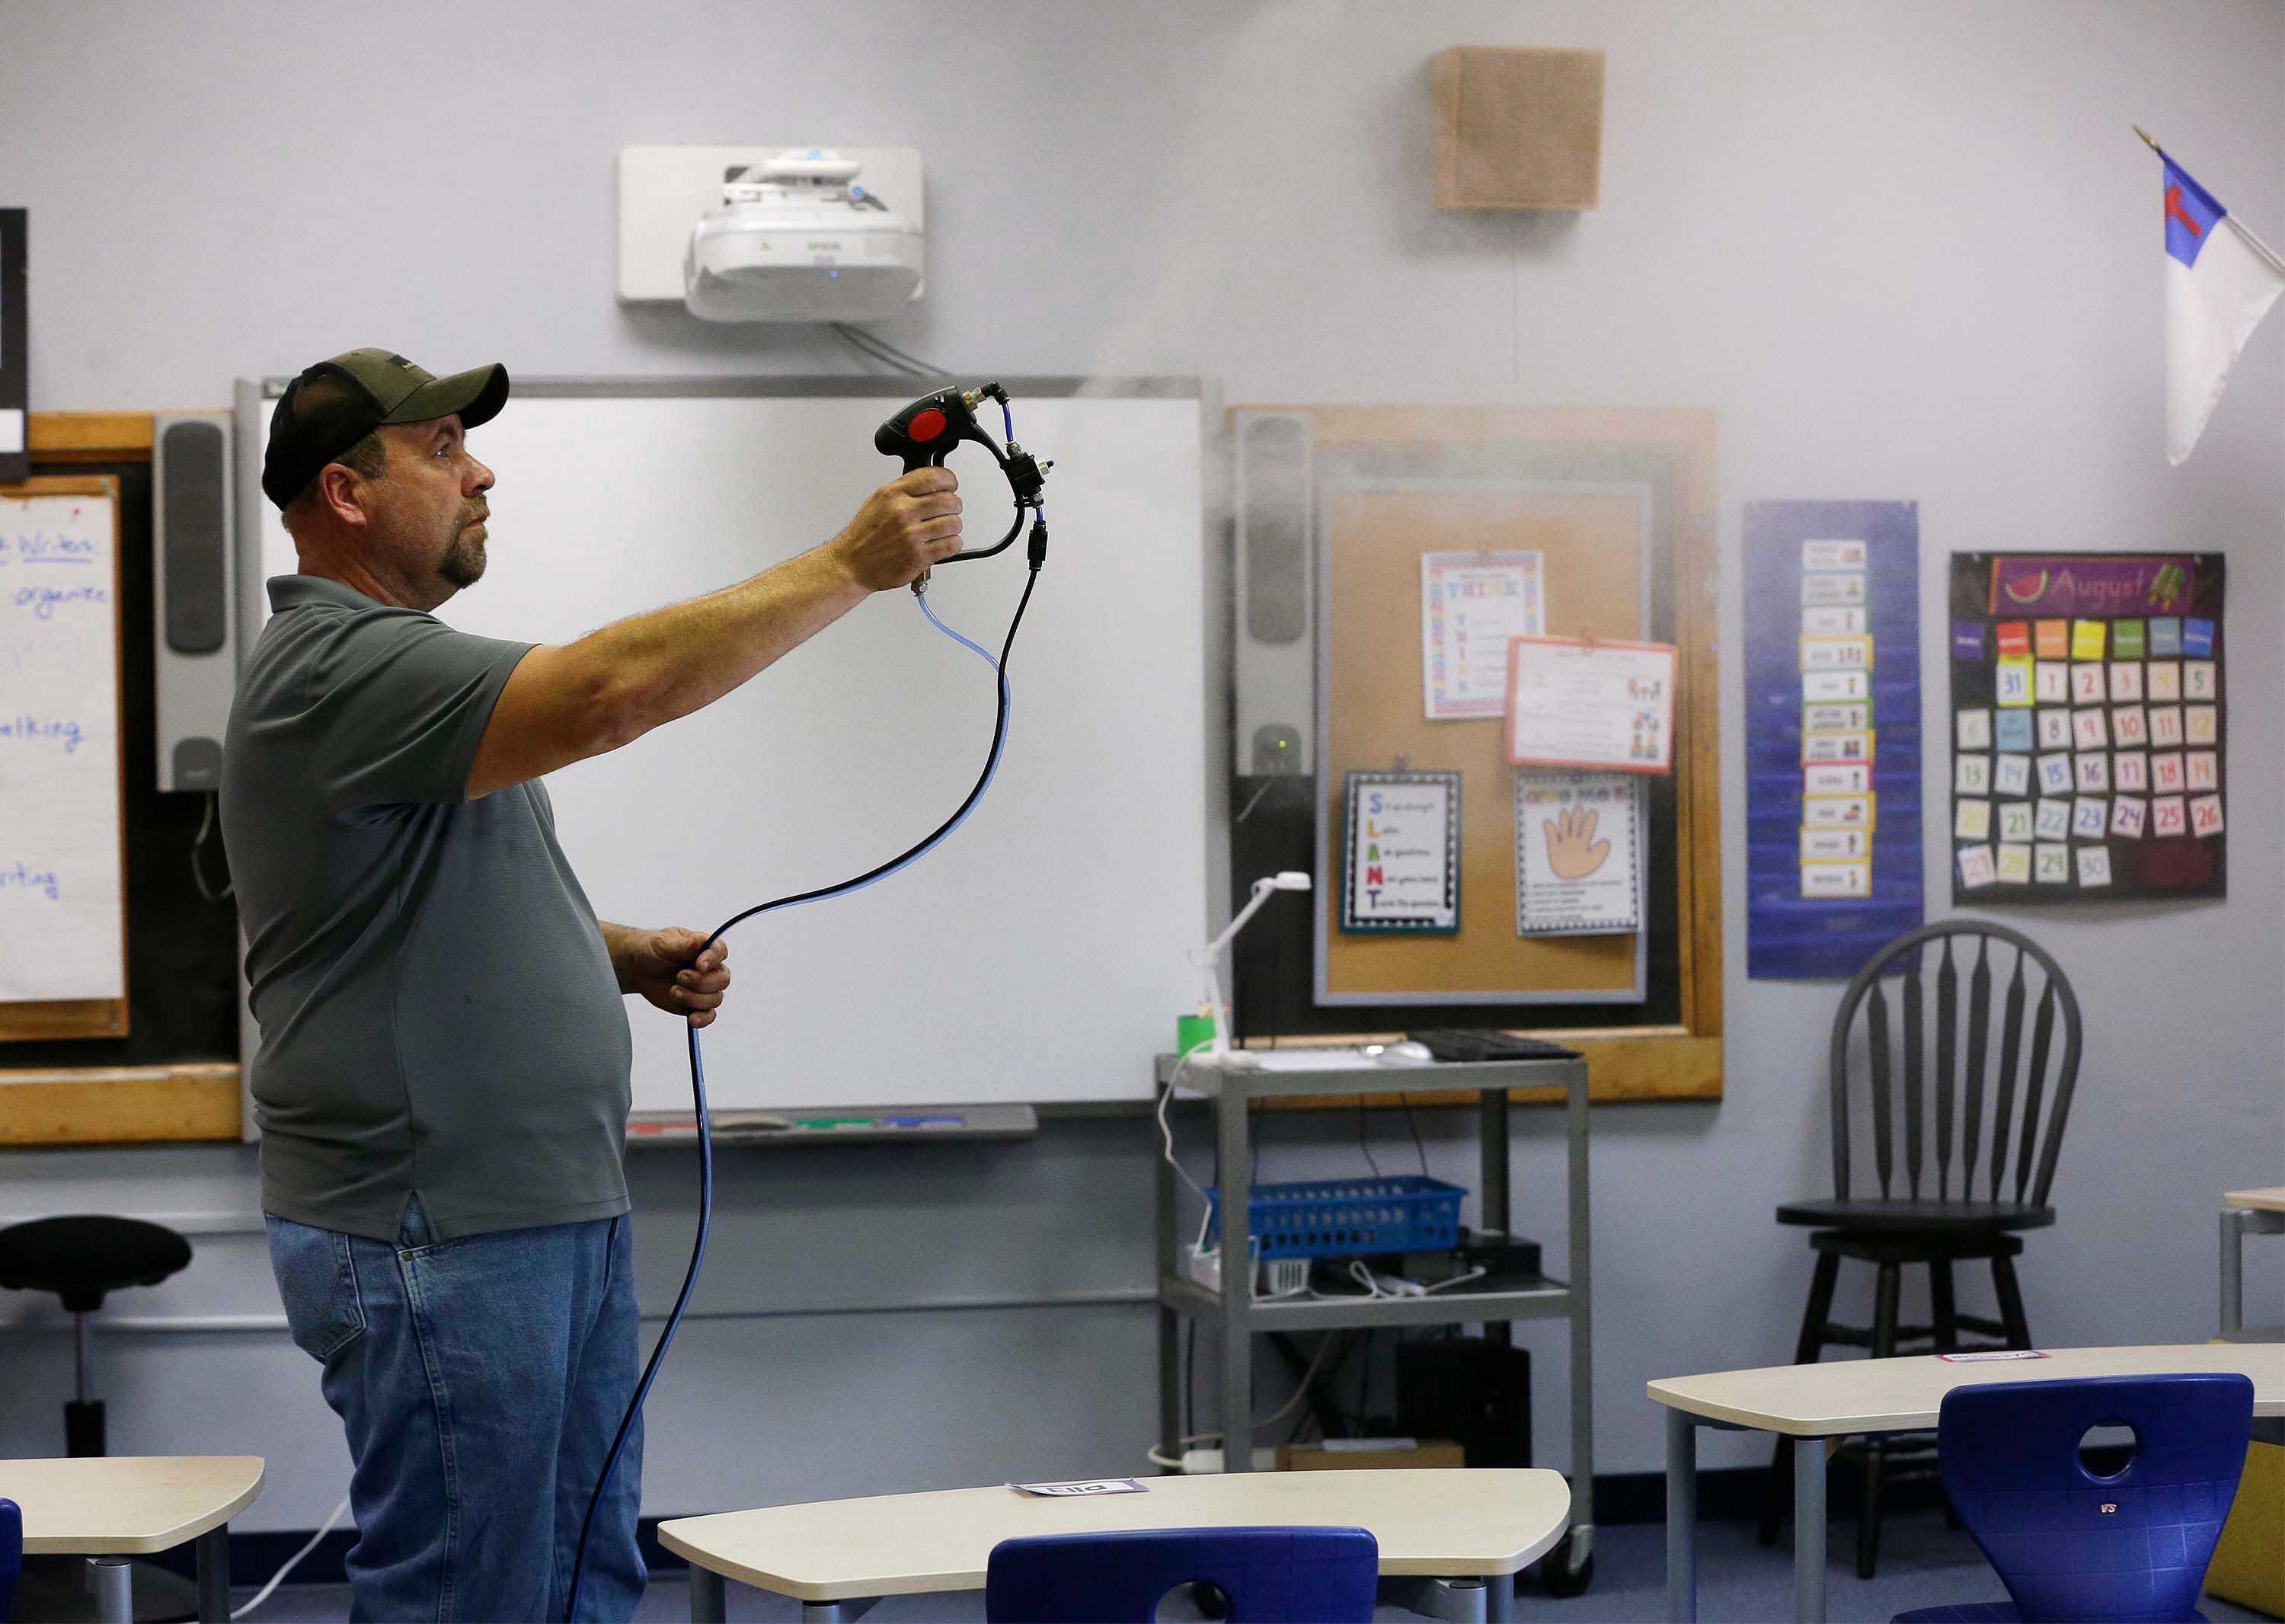 Randy Du Mez, of Ozo Kleen waves sanitizing fog in a Sheboygan Christian Elementary School classroom, Friday, August 28, 2020, in Sheboygan, Wis. The school, in addition to their safety protocols has added the fogging as an additional layer of safety for the school's 148 elementary students.